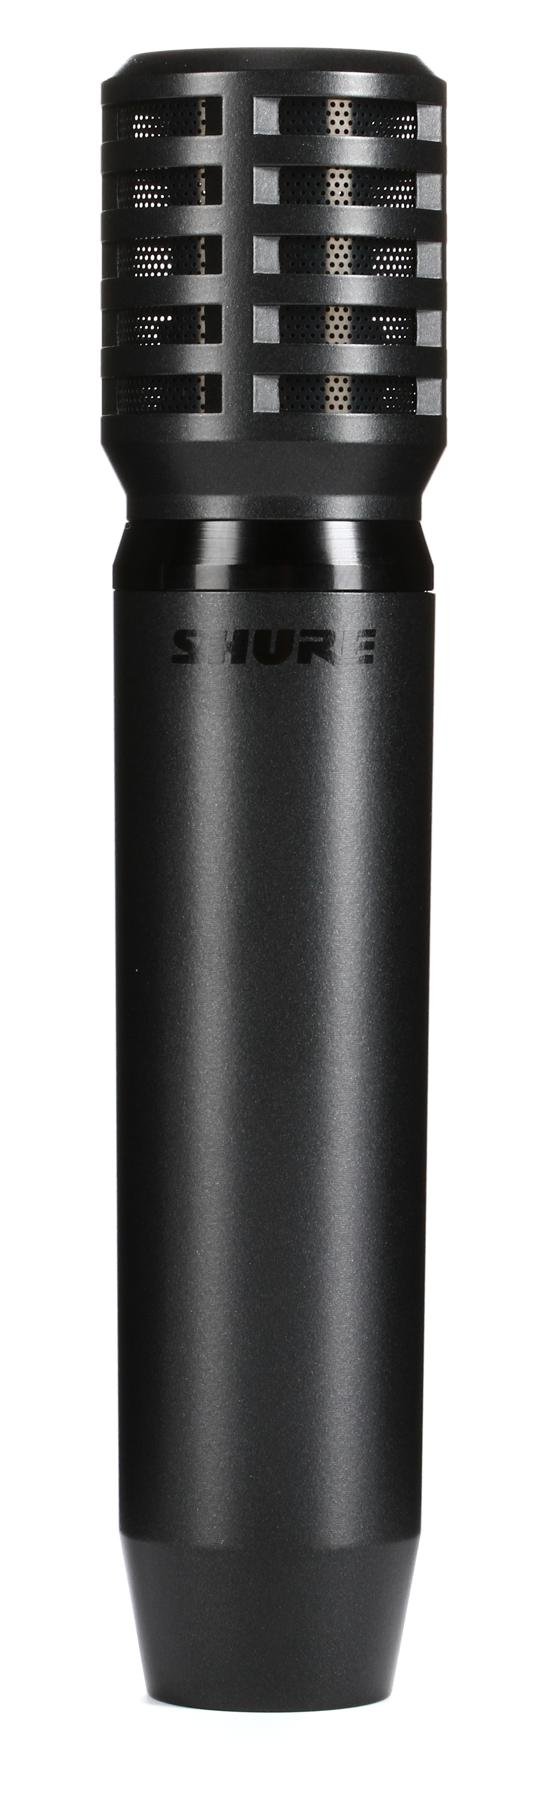 SHURE PGA81-XLR  -Condenser Microphone for instruments with XLR cable